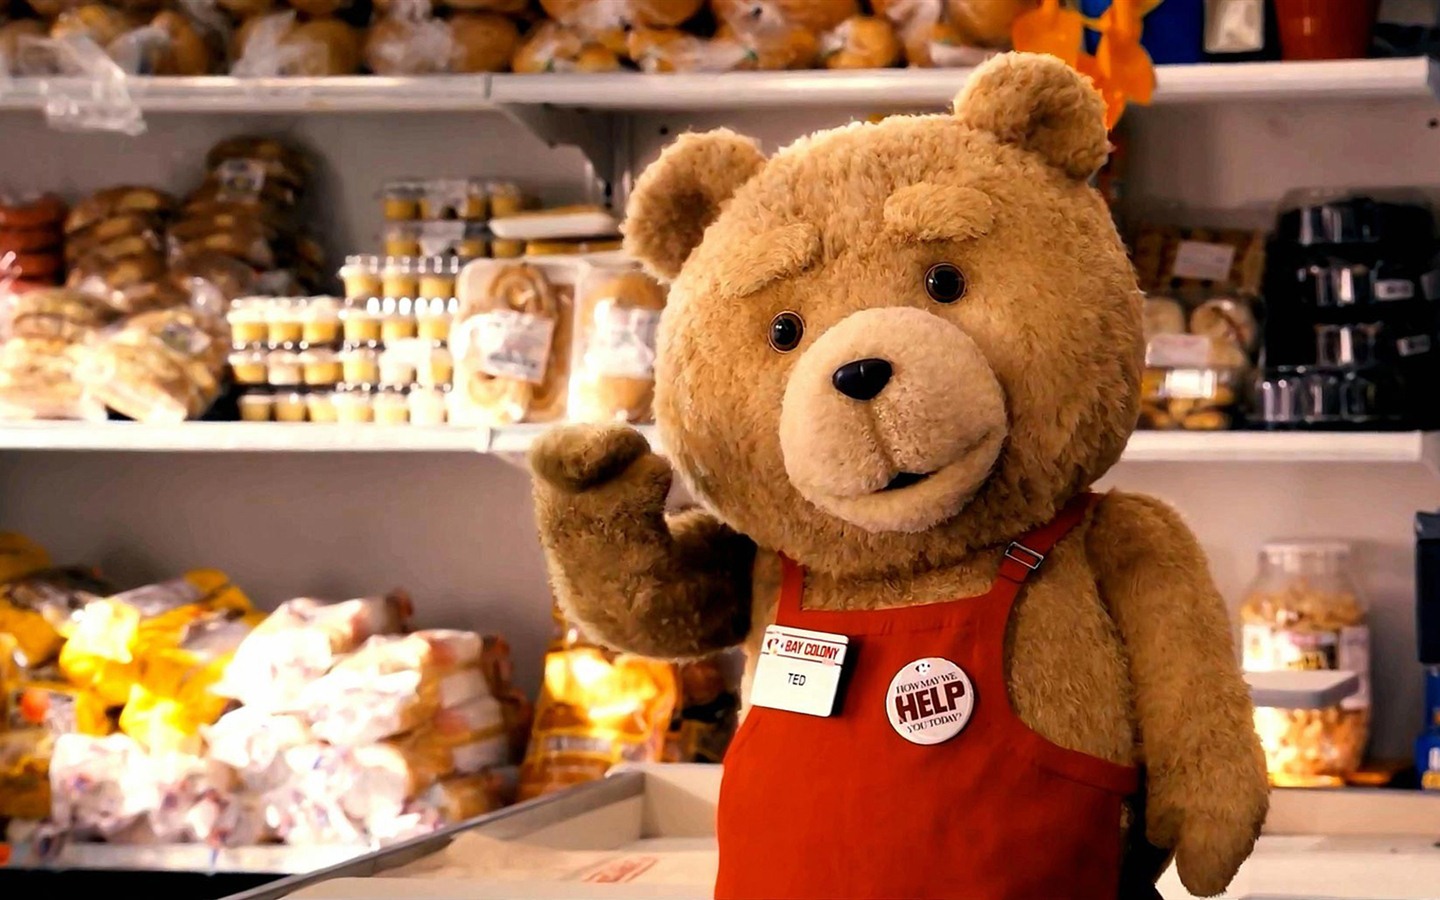 Ted 2012 HD movie wallpapers #18 - 1440x900